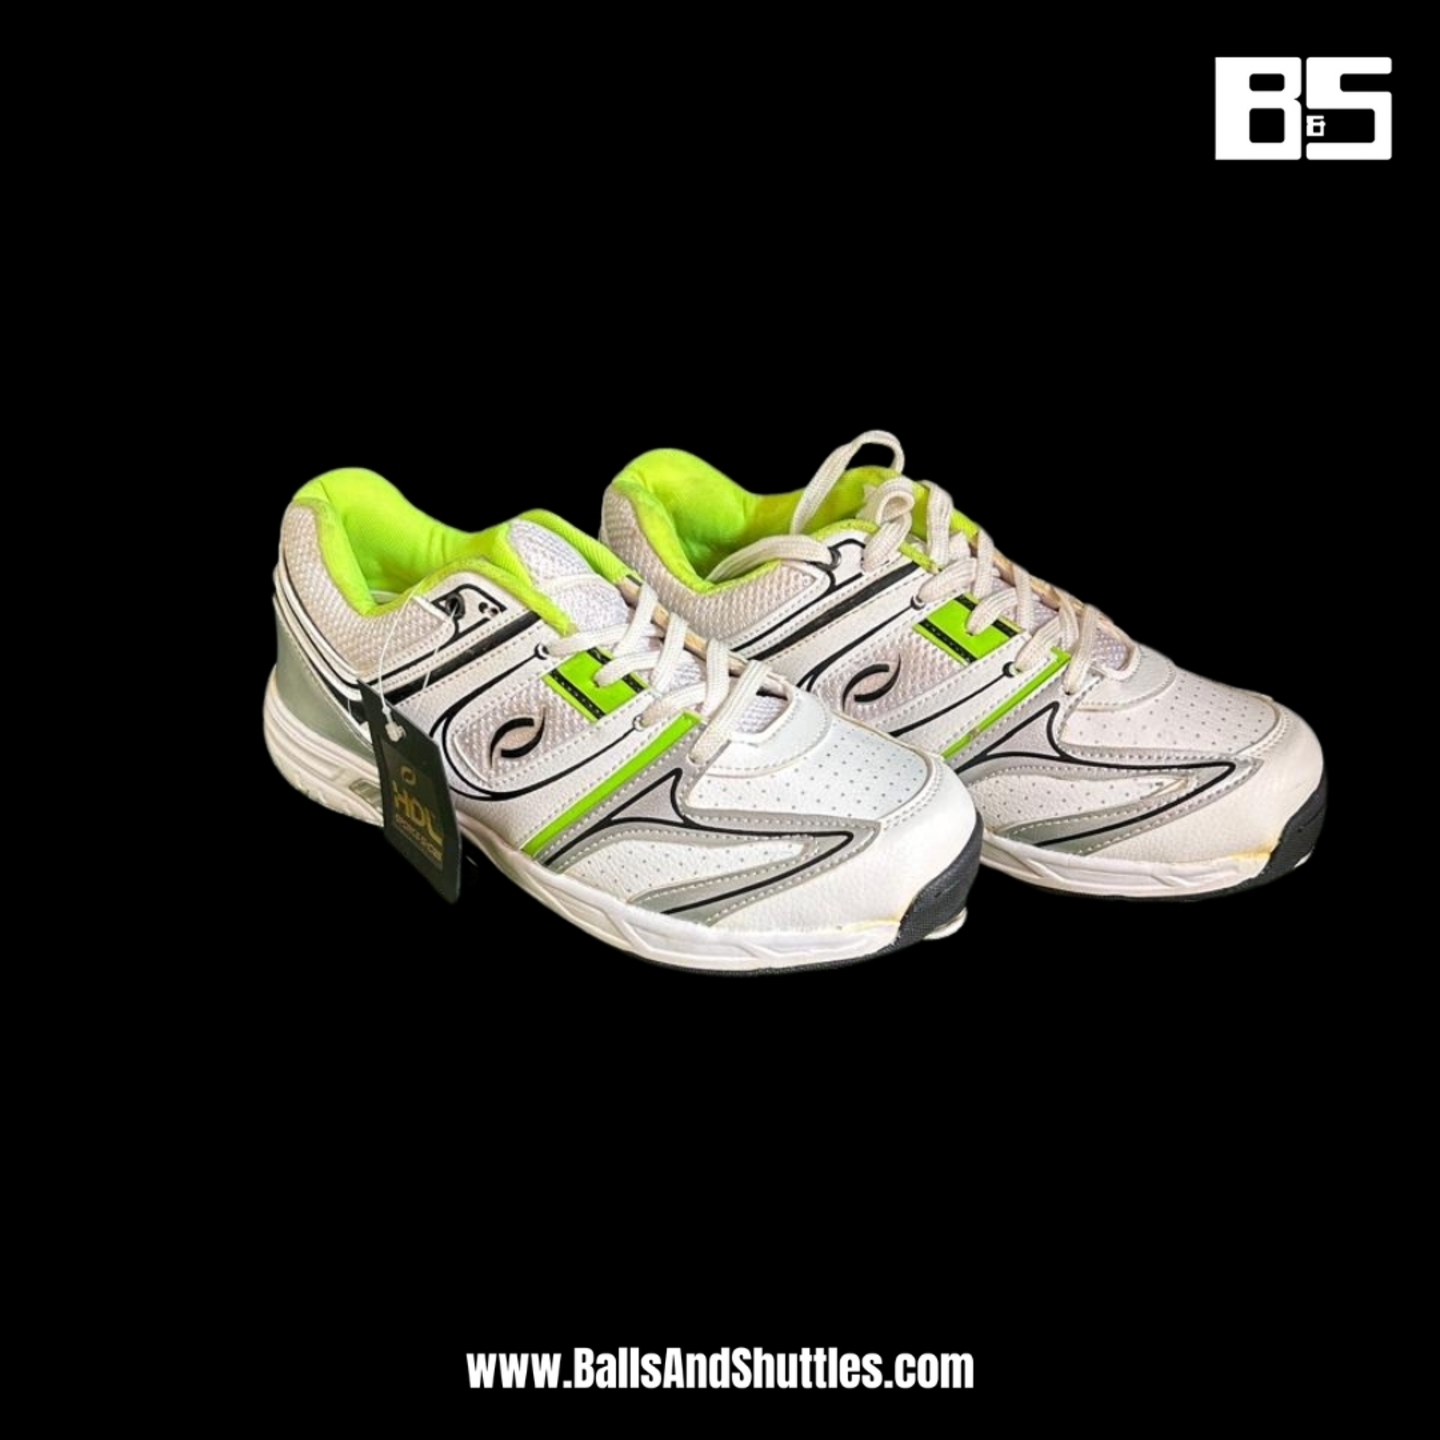 HDL TERMINATOR SIZE 8 CRICKET SHOES  HDL CRICKET SPIKES SHOES  HDL CRICKET HALF SPIKES SHOES  HDL CRICKET SHOES